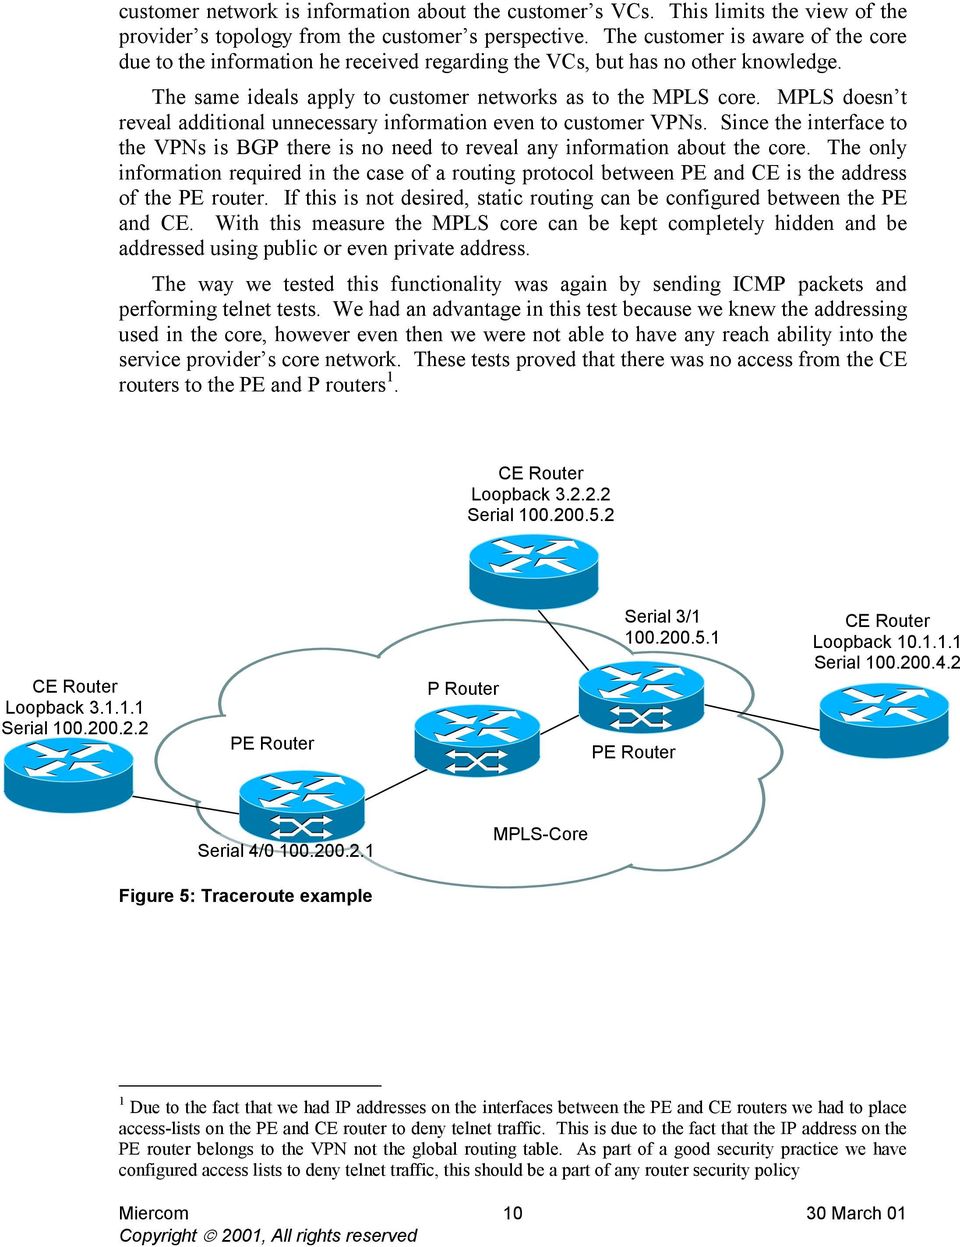 MPLS doesn t reveal additional unnecessary information even to customer VPNs. Since the interface to the VPNs is BGP there is no need to reveal any information about the core.